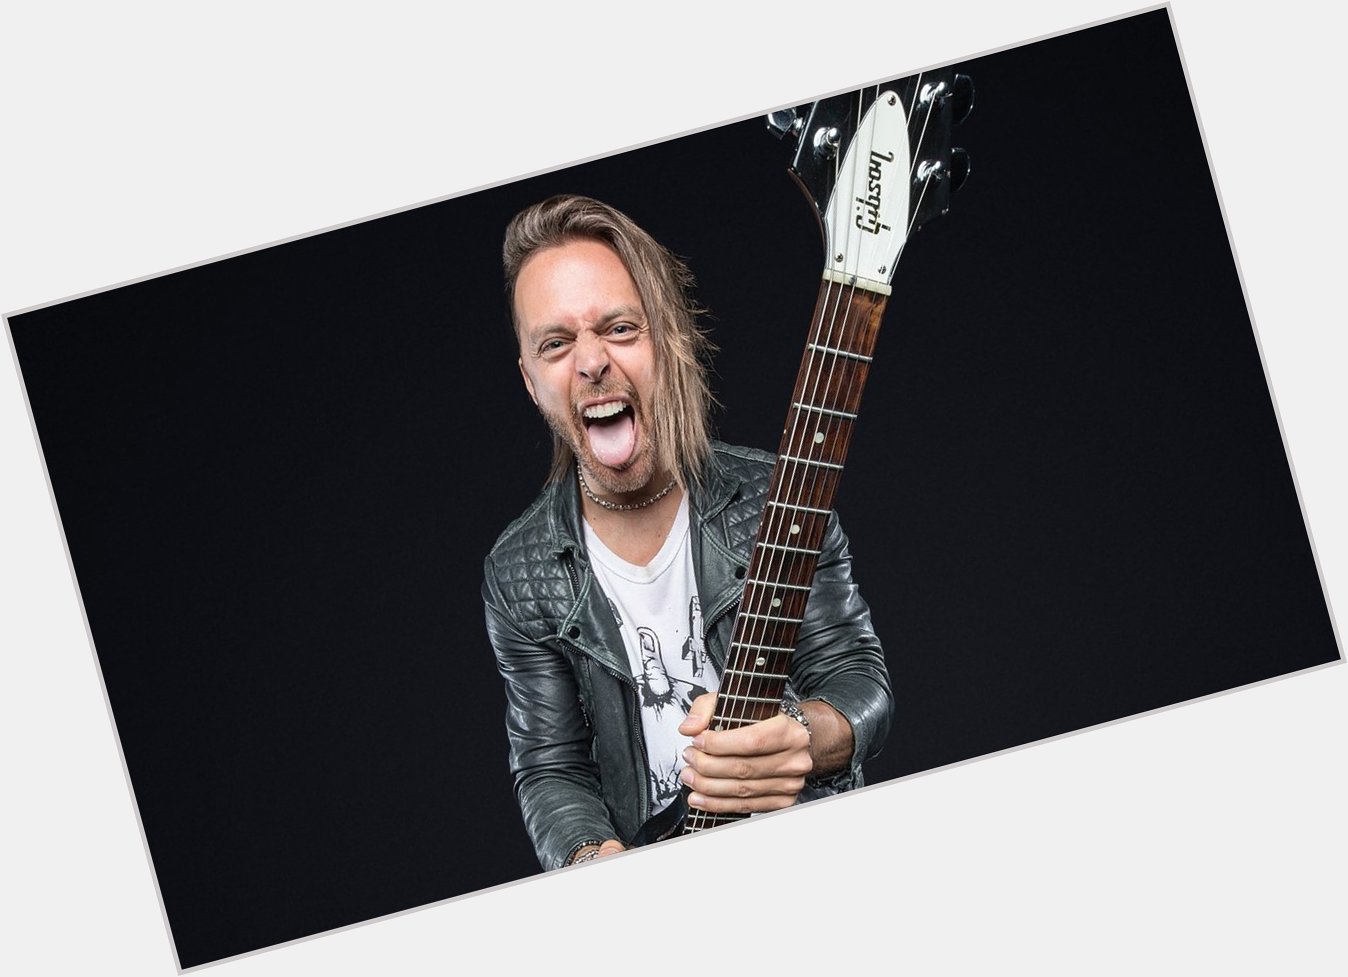 Please join me here at in wishing the one and only Matthew Tuck a very Happy 41st Birthday today  